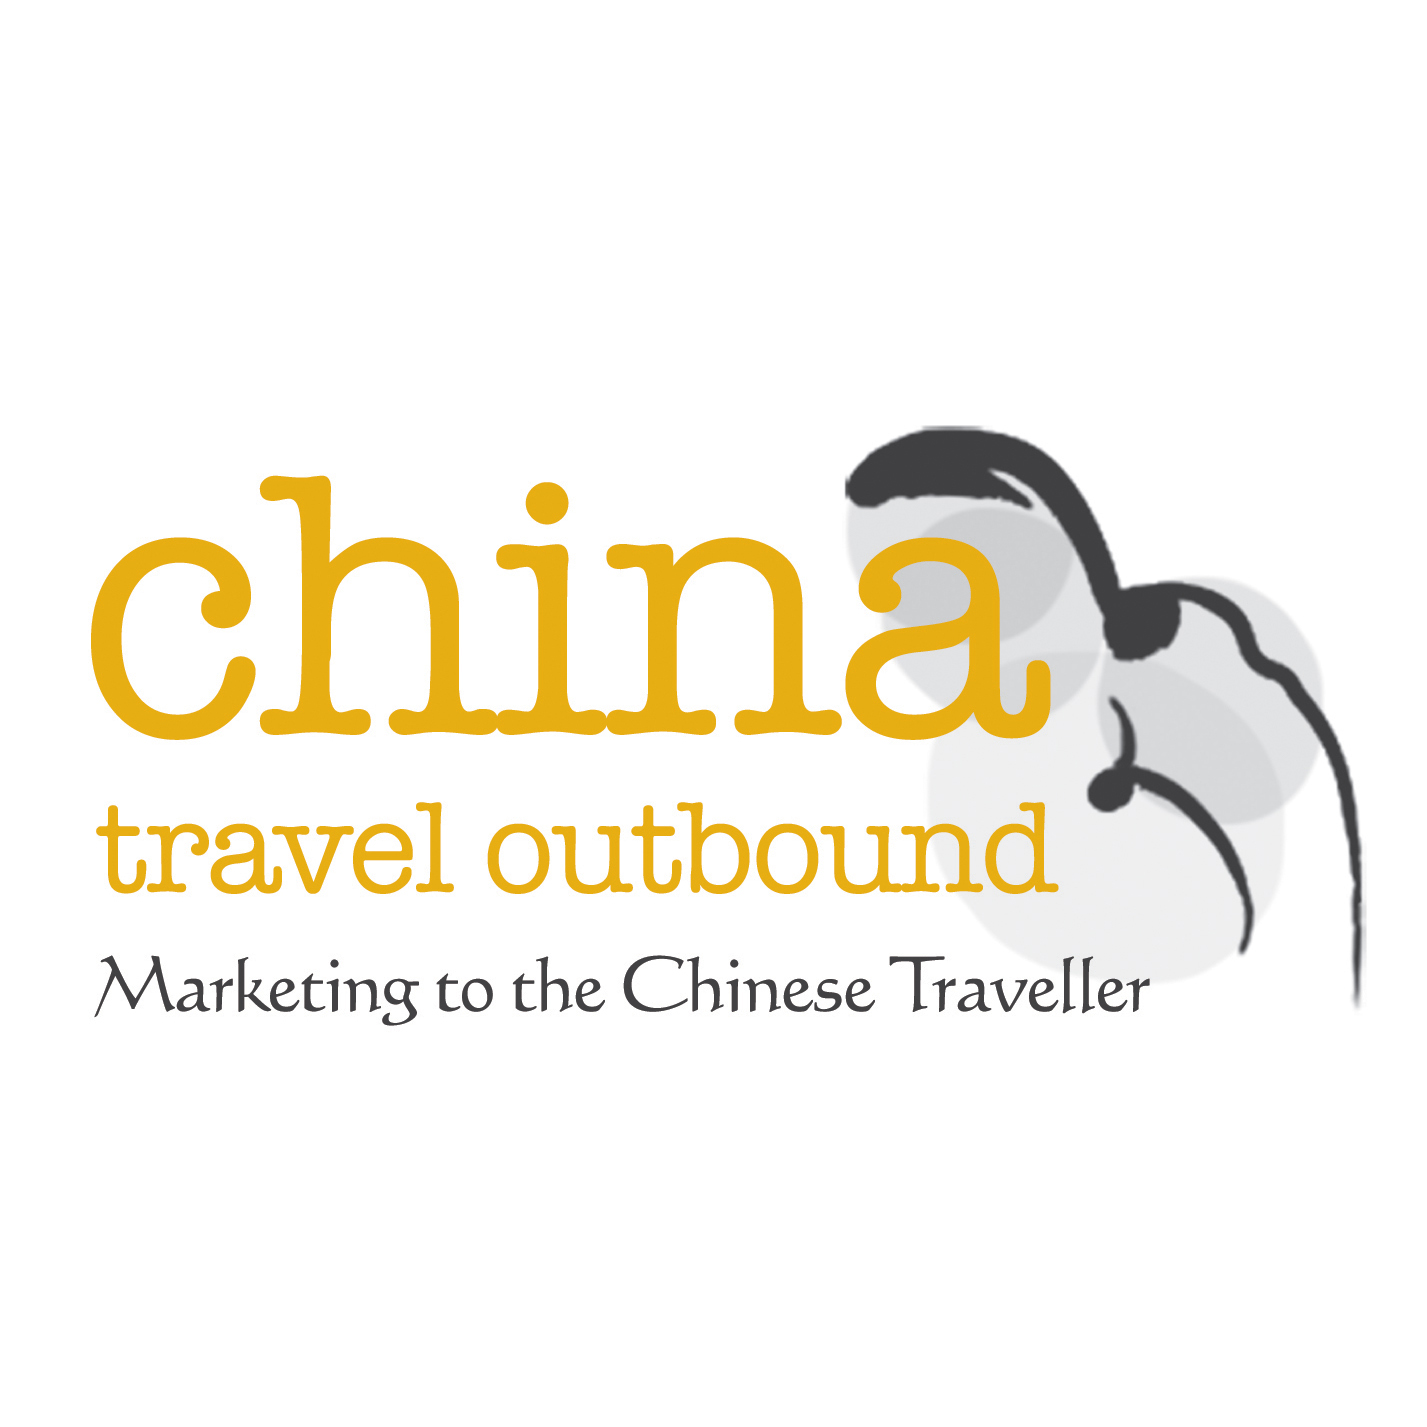 ecographic-china-travel-outbound